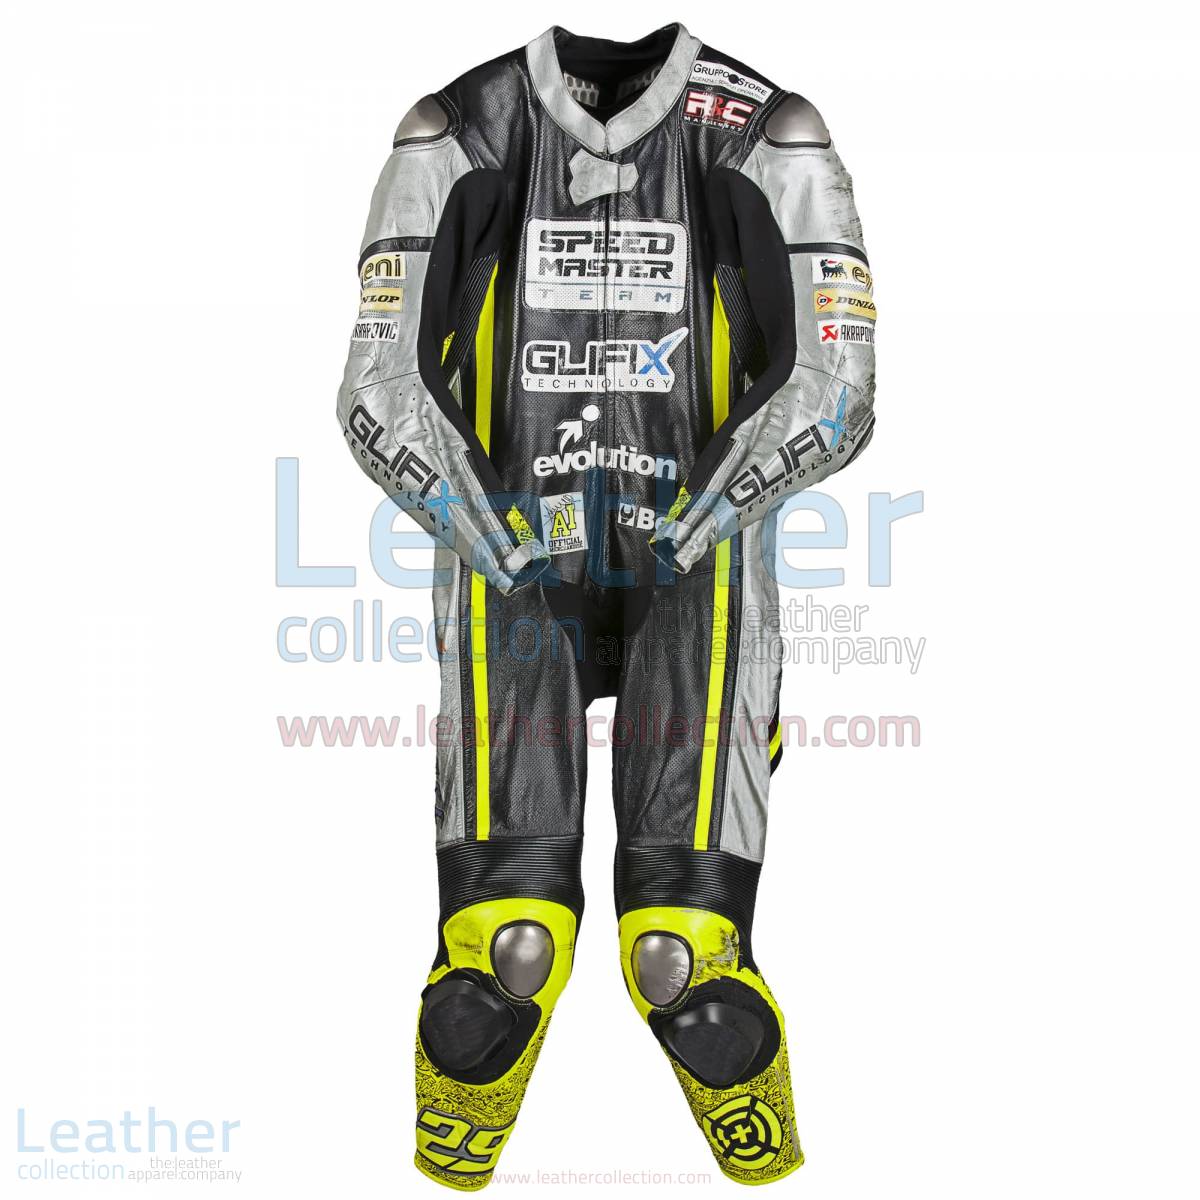 Andrea Iannone Speed UP 2012 Racing Suit